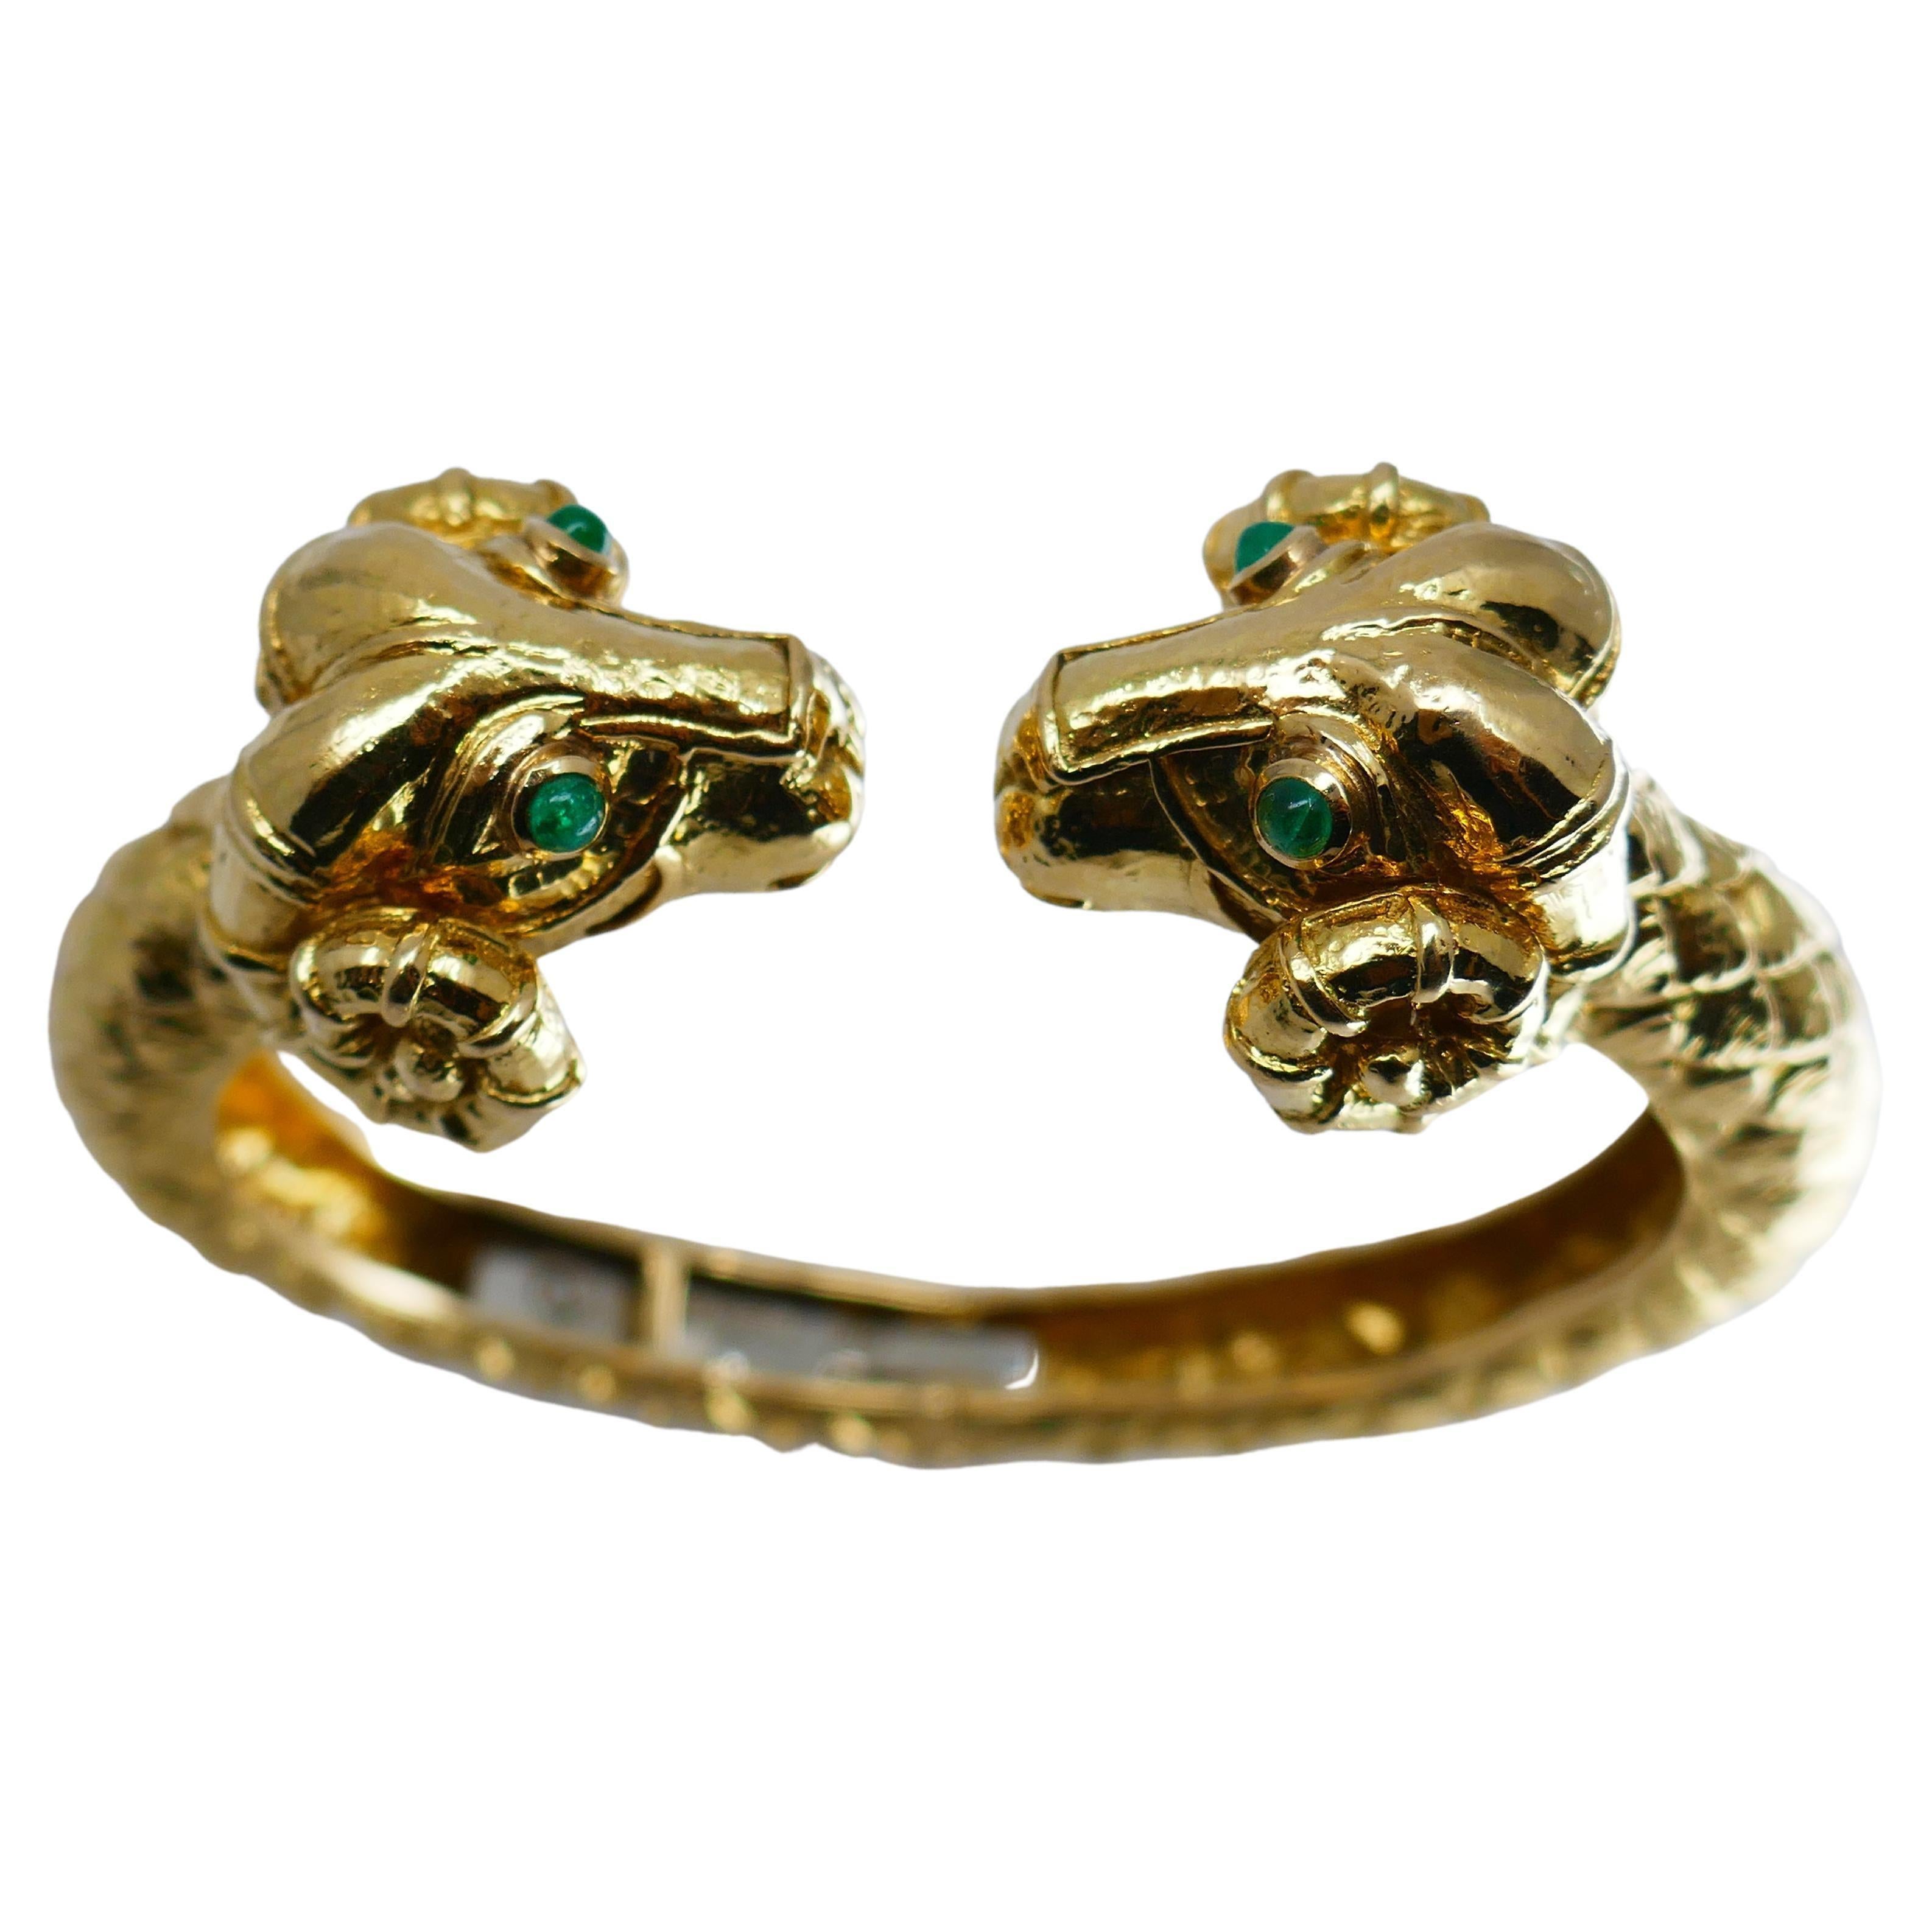 A hinged cuff bracelet by David Webb, made of 18k gold, features emerald.
The bracelet designed as two ram heads facing each other. The rams can be interpreted as Aries astrological sign. The emerald is cabochon cut.

About David Webb 
Bold,